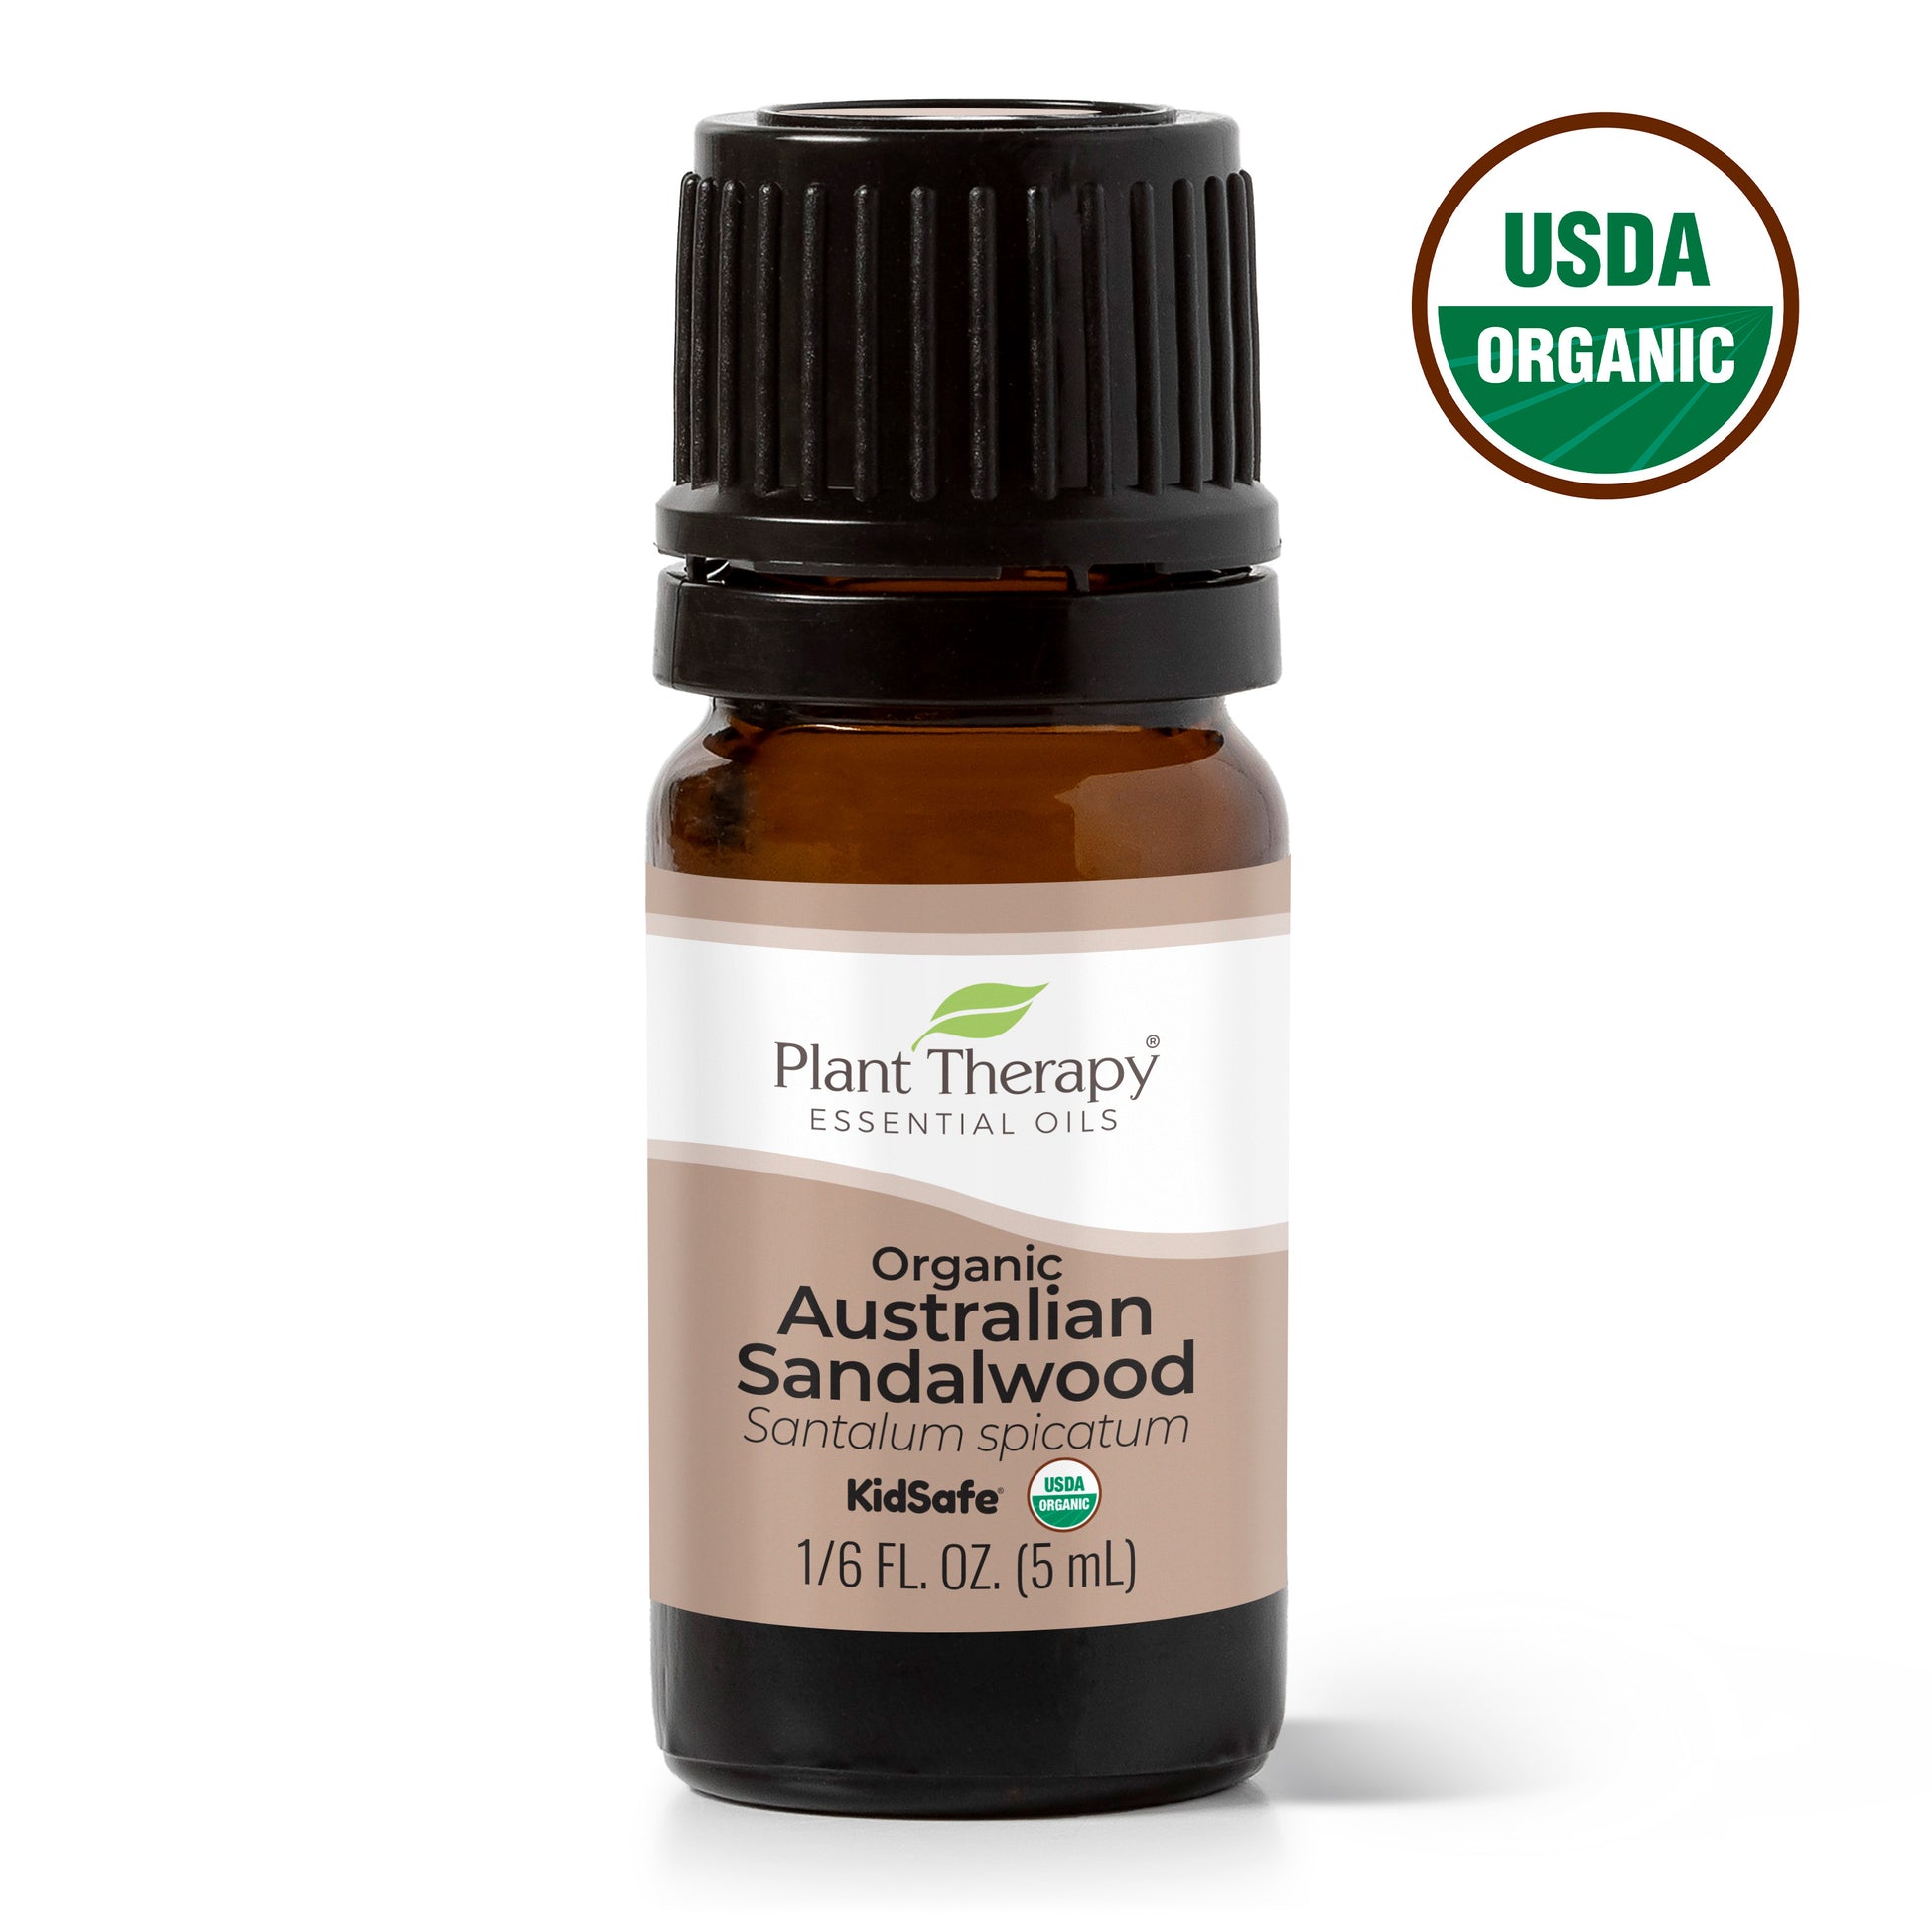 Sandalwood Indonesian Essential Oil - Essential Oil Apothecary